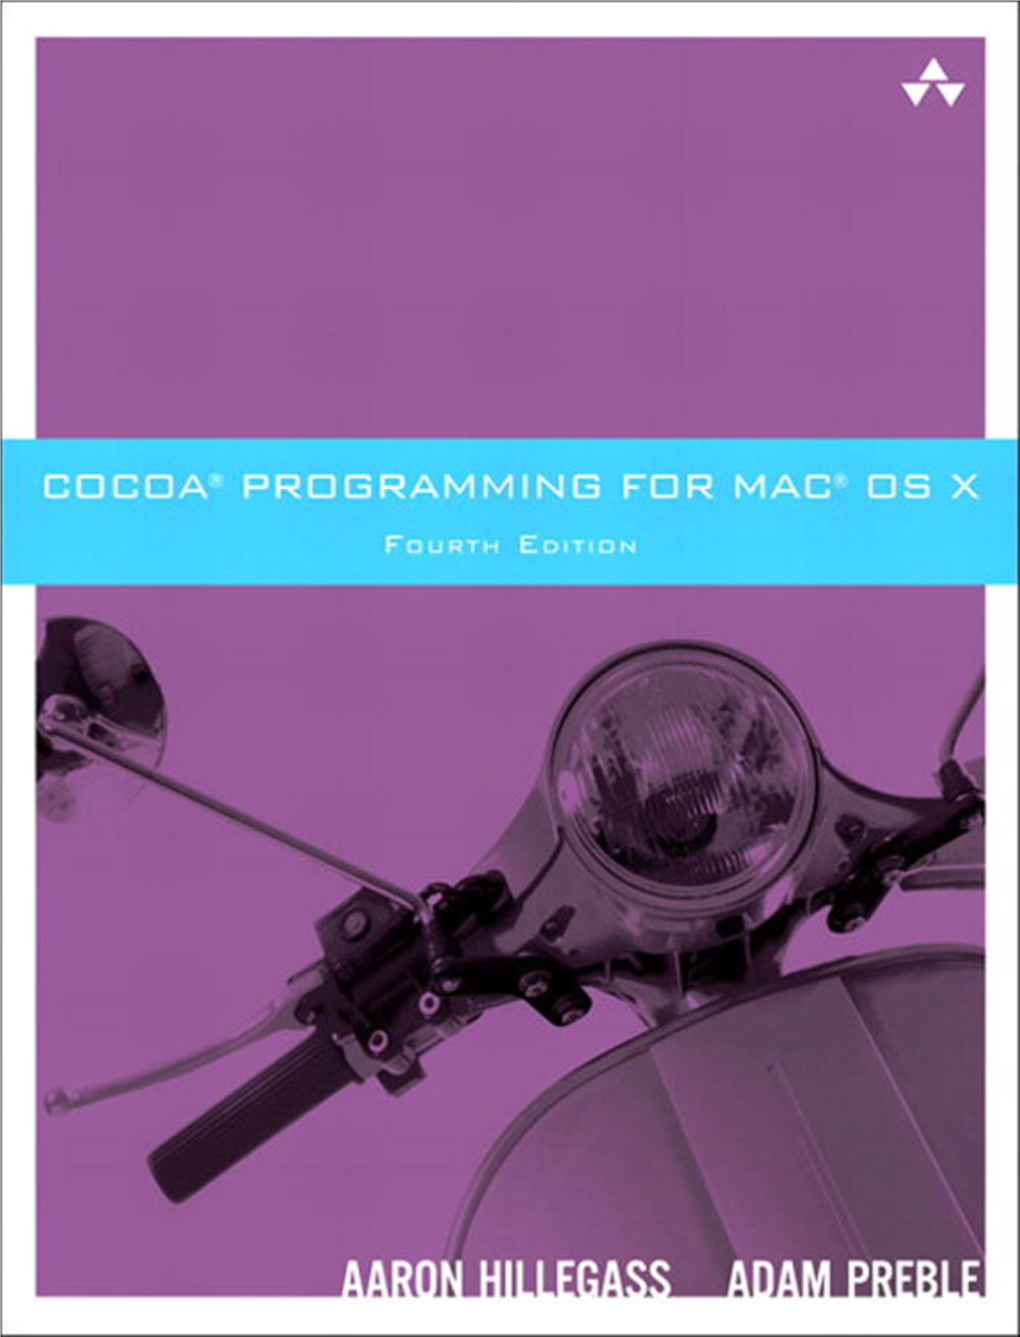 Cocoa® Programming for Mac® Os X